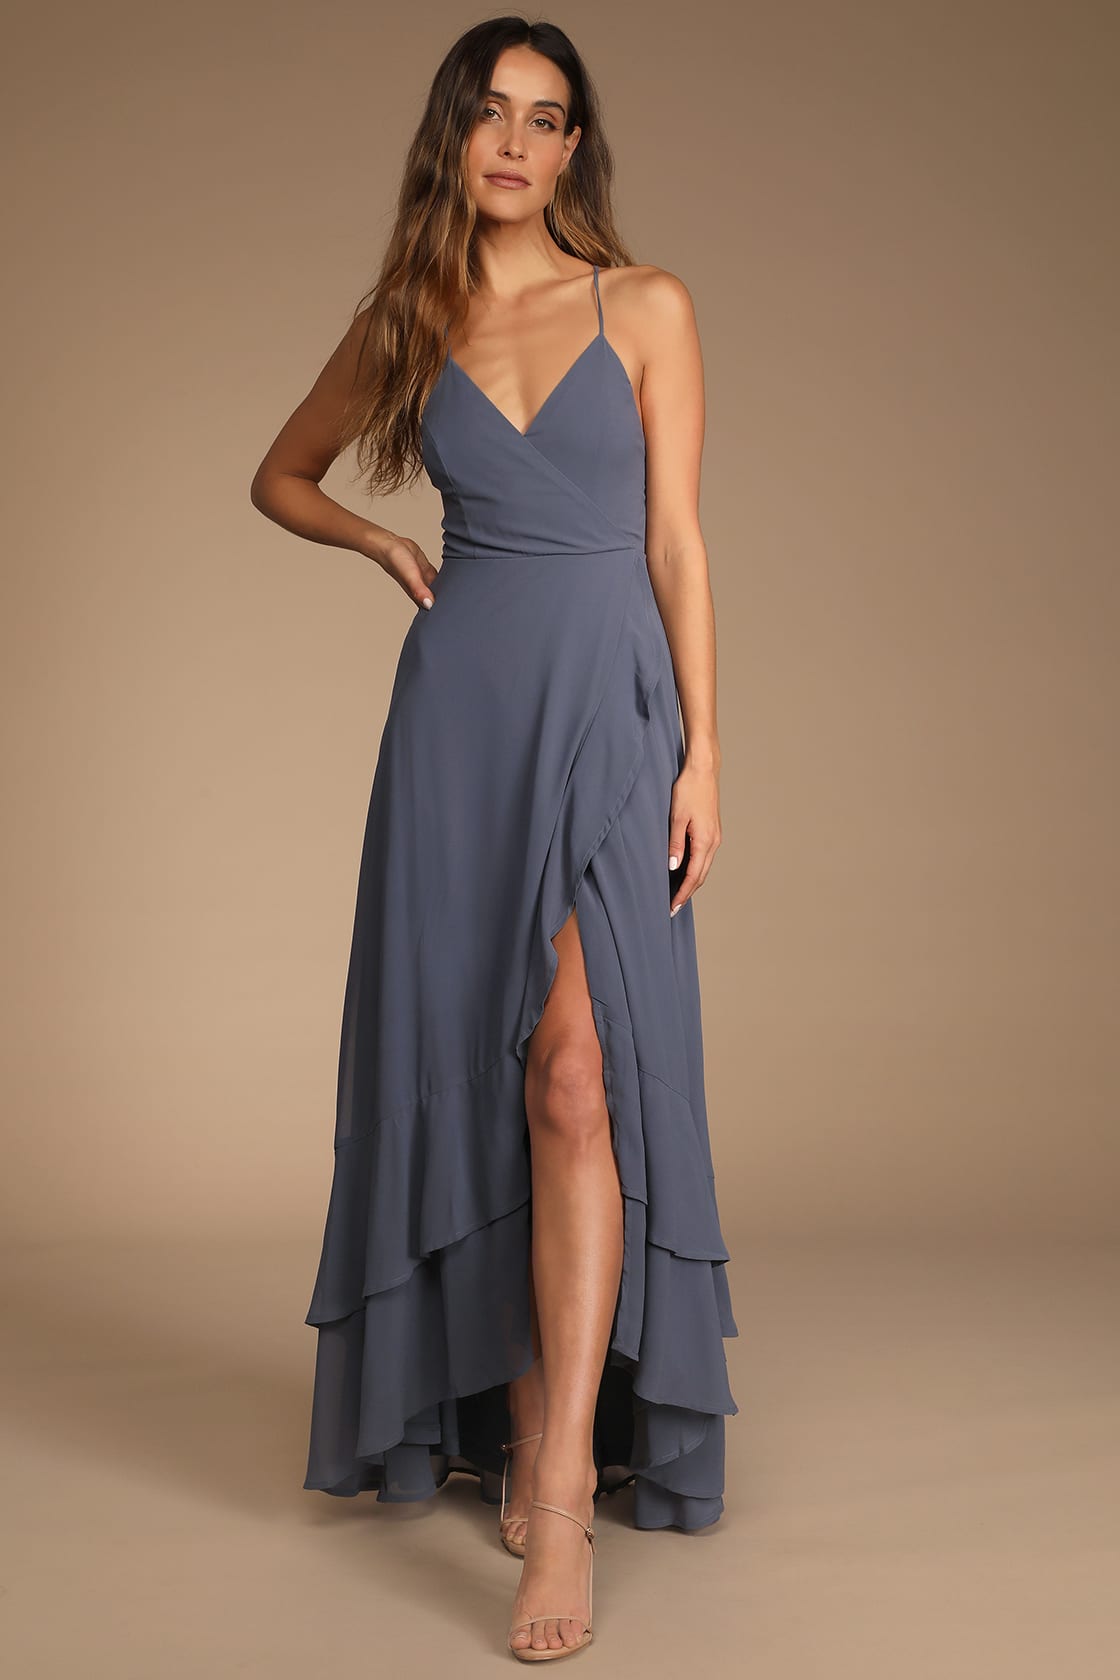 In Love Forever Granite Blue Lace-Up High-Low Maxi Dress